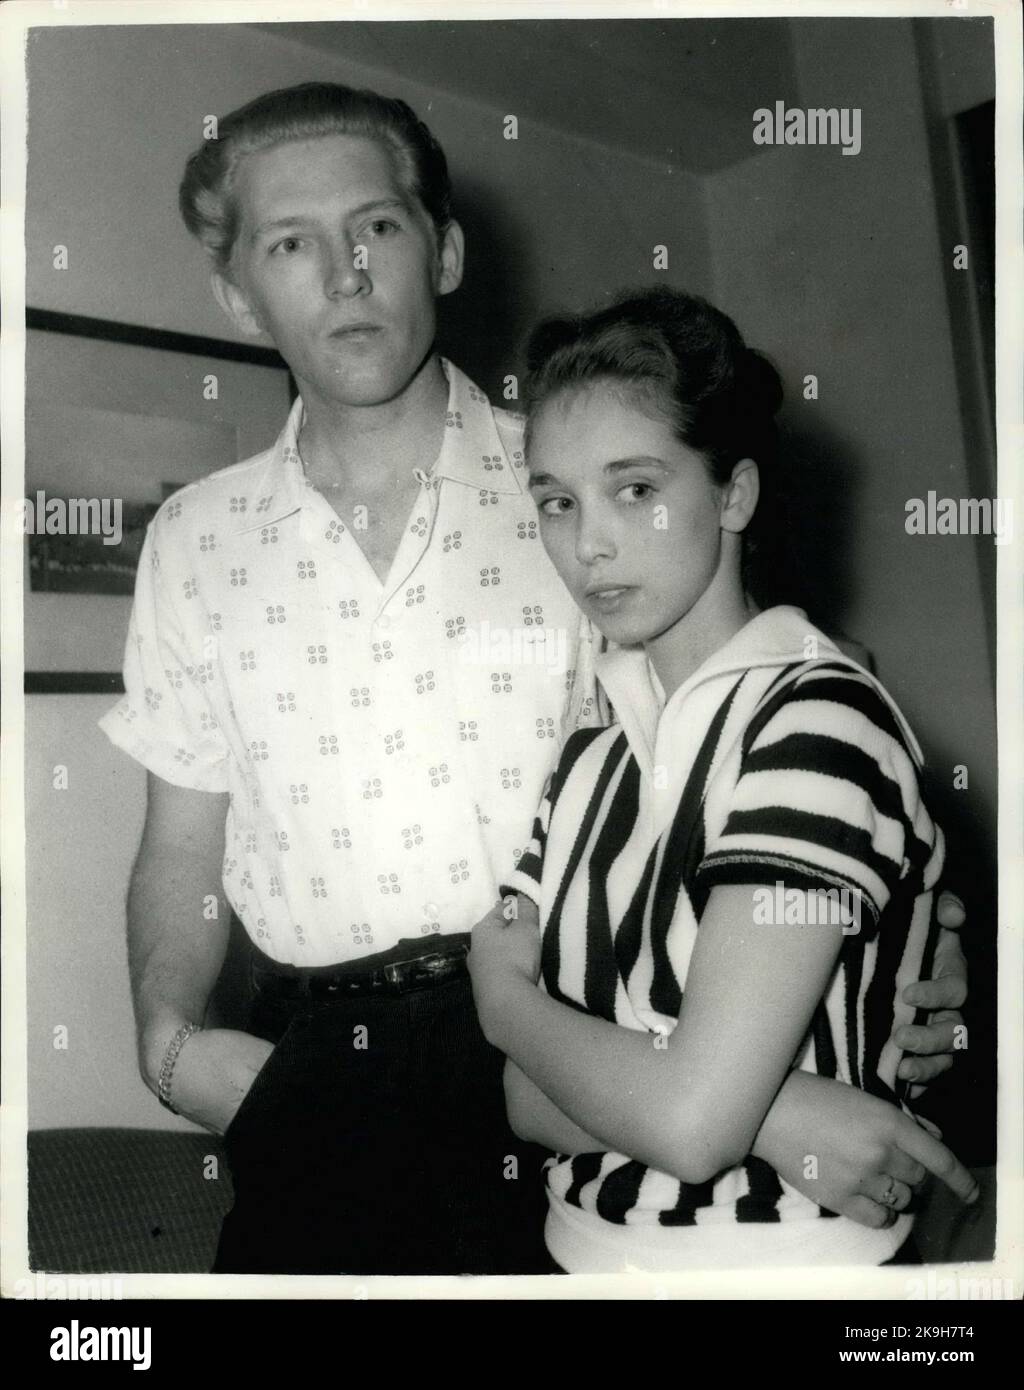 May 23, 1958 - 22 - year - old American rock n' roll singer arrives here with his 15 - year old wife: Jerry Lee Lewis, the American rock n' roll singer, flew into London yesterday with a shock for his fans. For the girl who arrived with him turned out to be his 15 - year - old wife of two months. Her name was Myra, and she is his third wife. Jerry was first married at 15 and again at 17, but this time he says he has found the right girl.When asked if she thought that fifteen was too young to be a wife, Myra explained that back at her home town Memphis, Tennessee, you can marry at the age of te Stock Photo